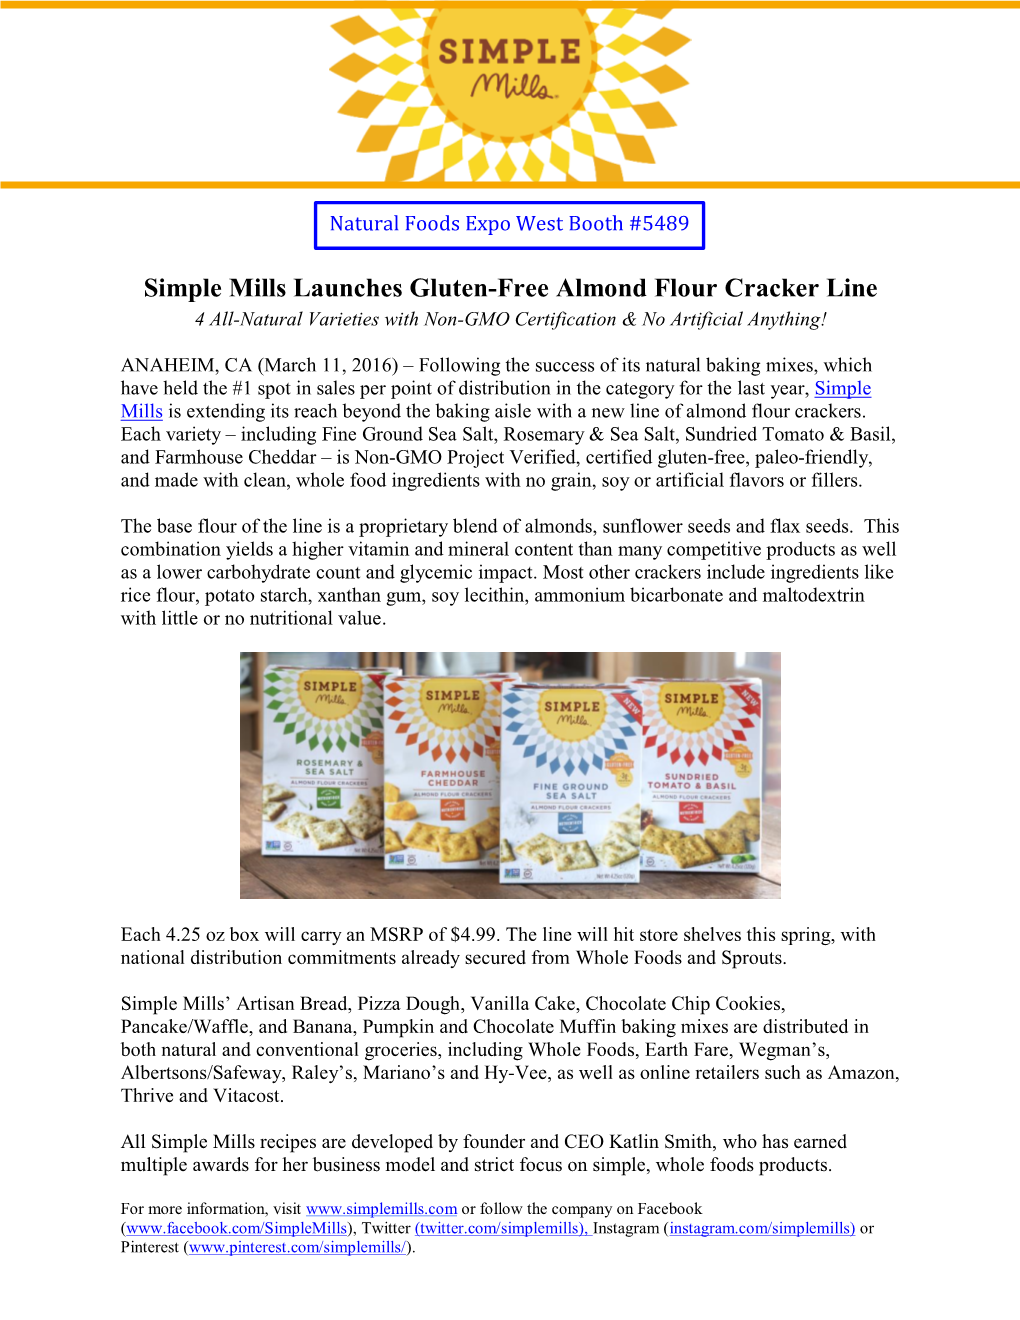 Simple Mills Launches Gluten-Free Almond Flour Cracker Line 4 All-Natural Varieties with Non-GMO Certification & No Artificial Anything!